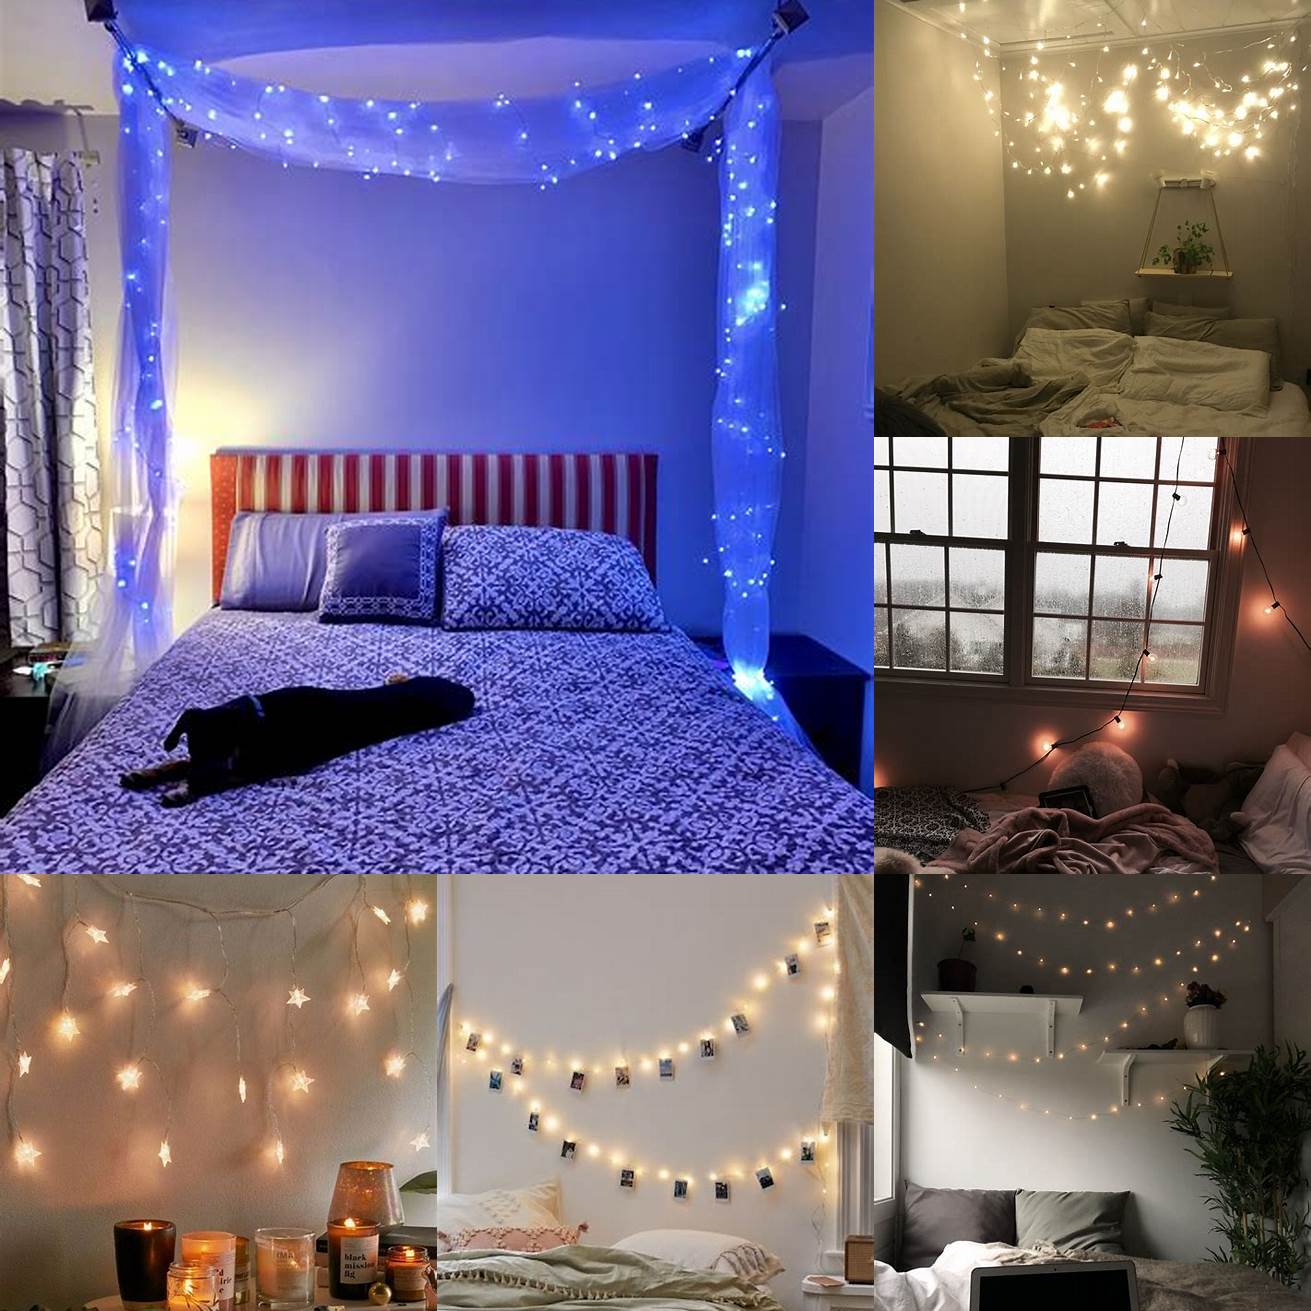 Add fairy lights for a cozy and whimsical touch